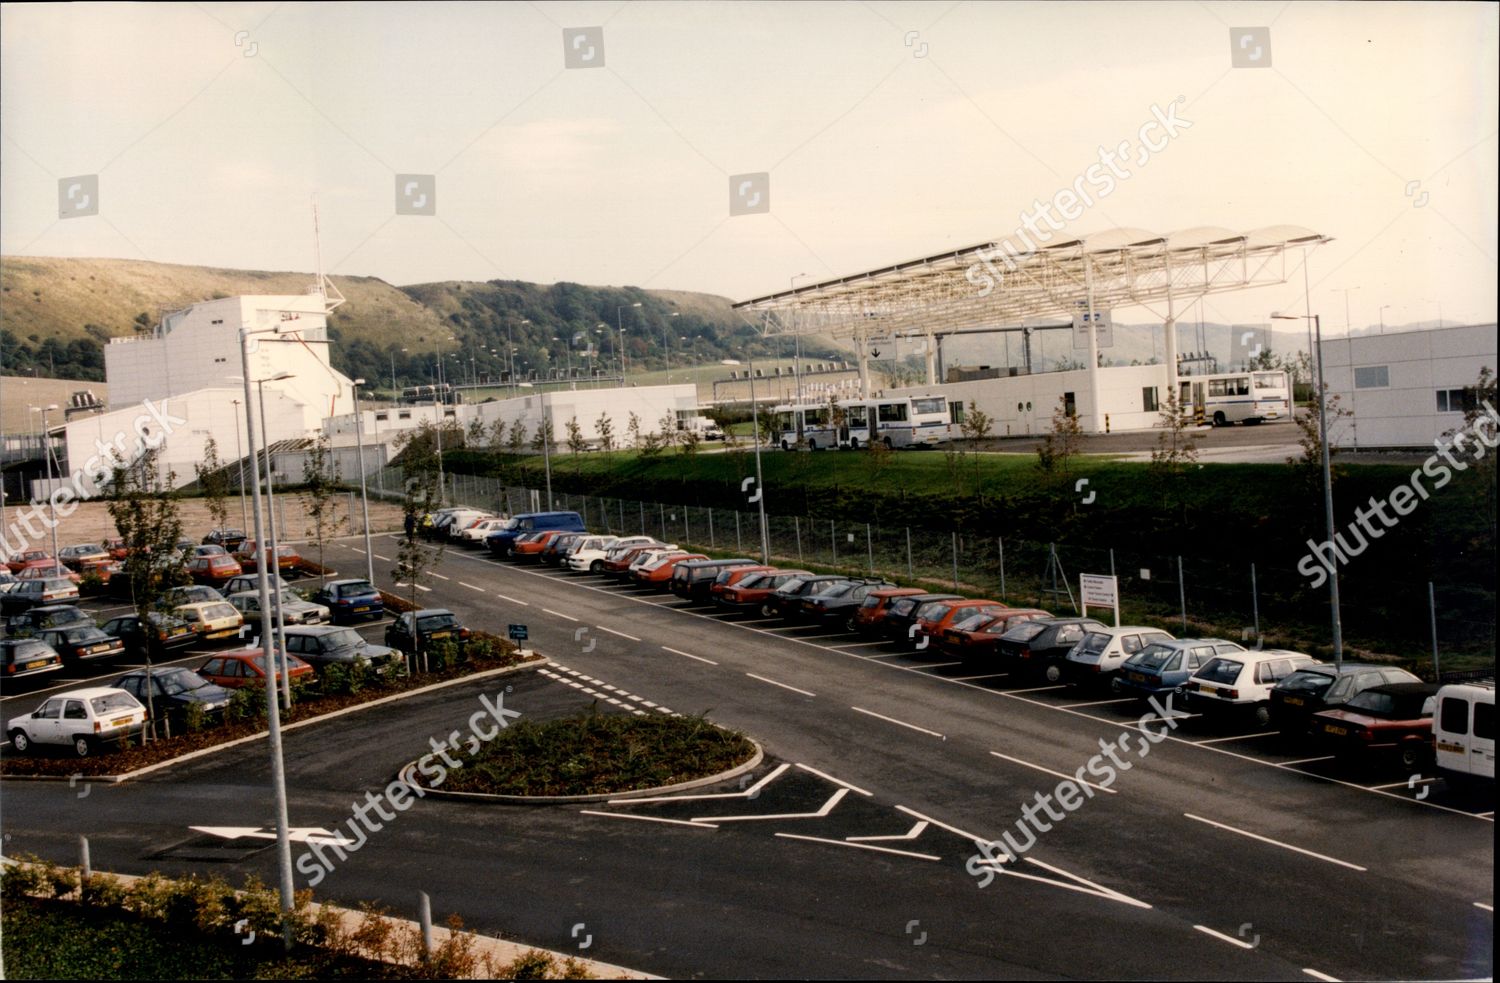 Channel Tunnel Railway Train Terminals Le Shuttle Editorial Stock Photo Stock Image Shutterstock